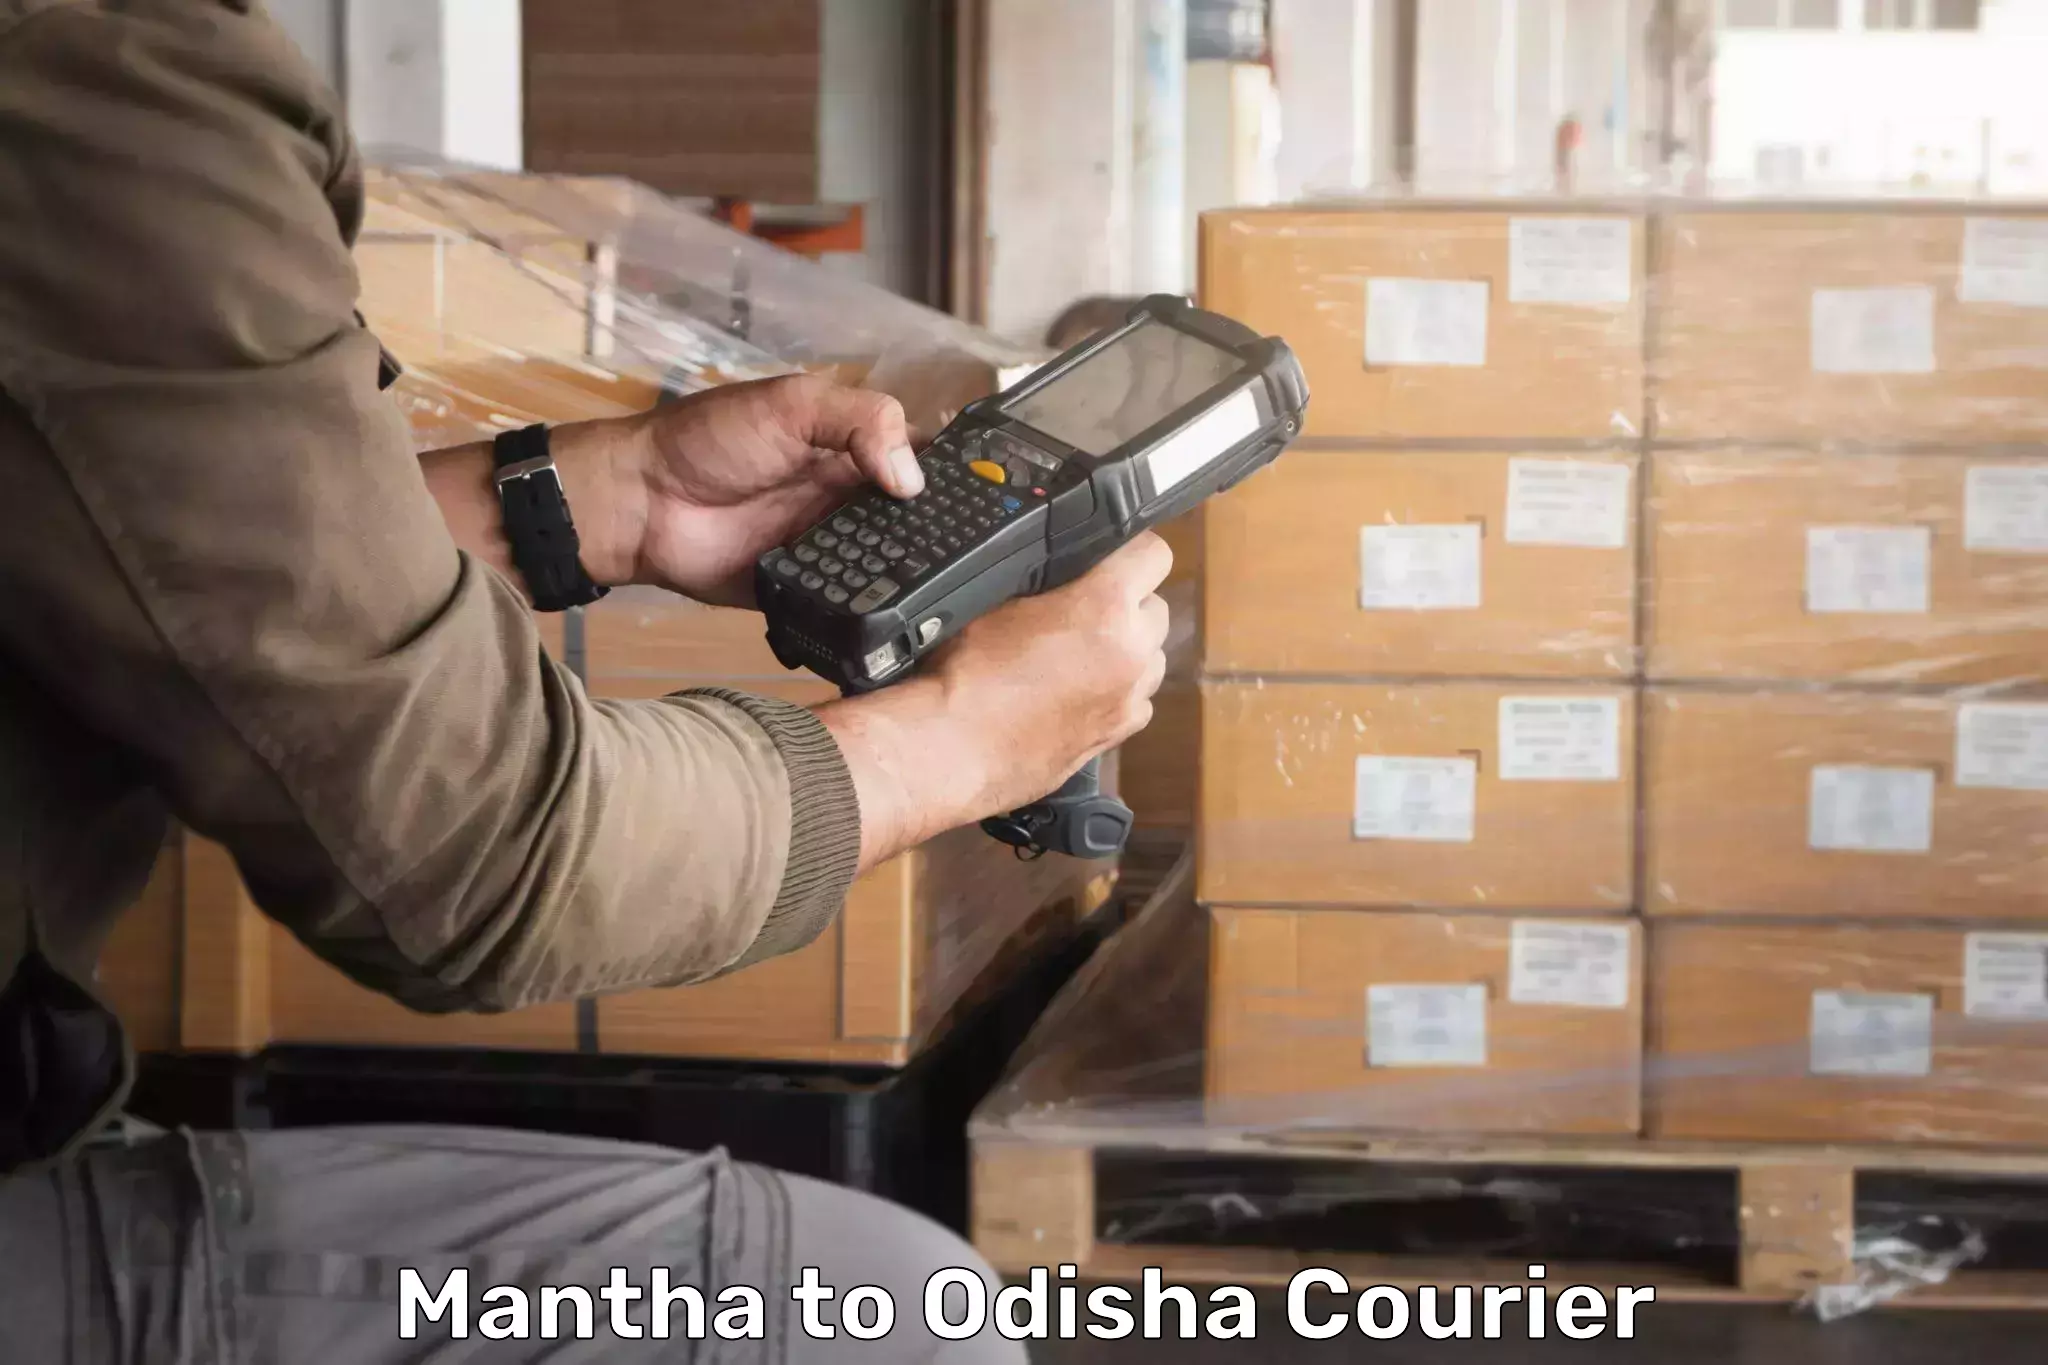 Courier service efficiency Mantha to Odisha